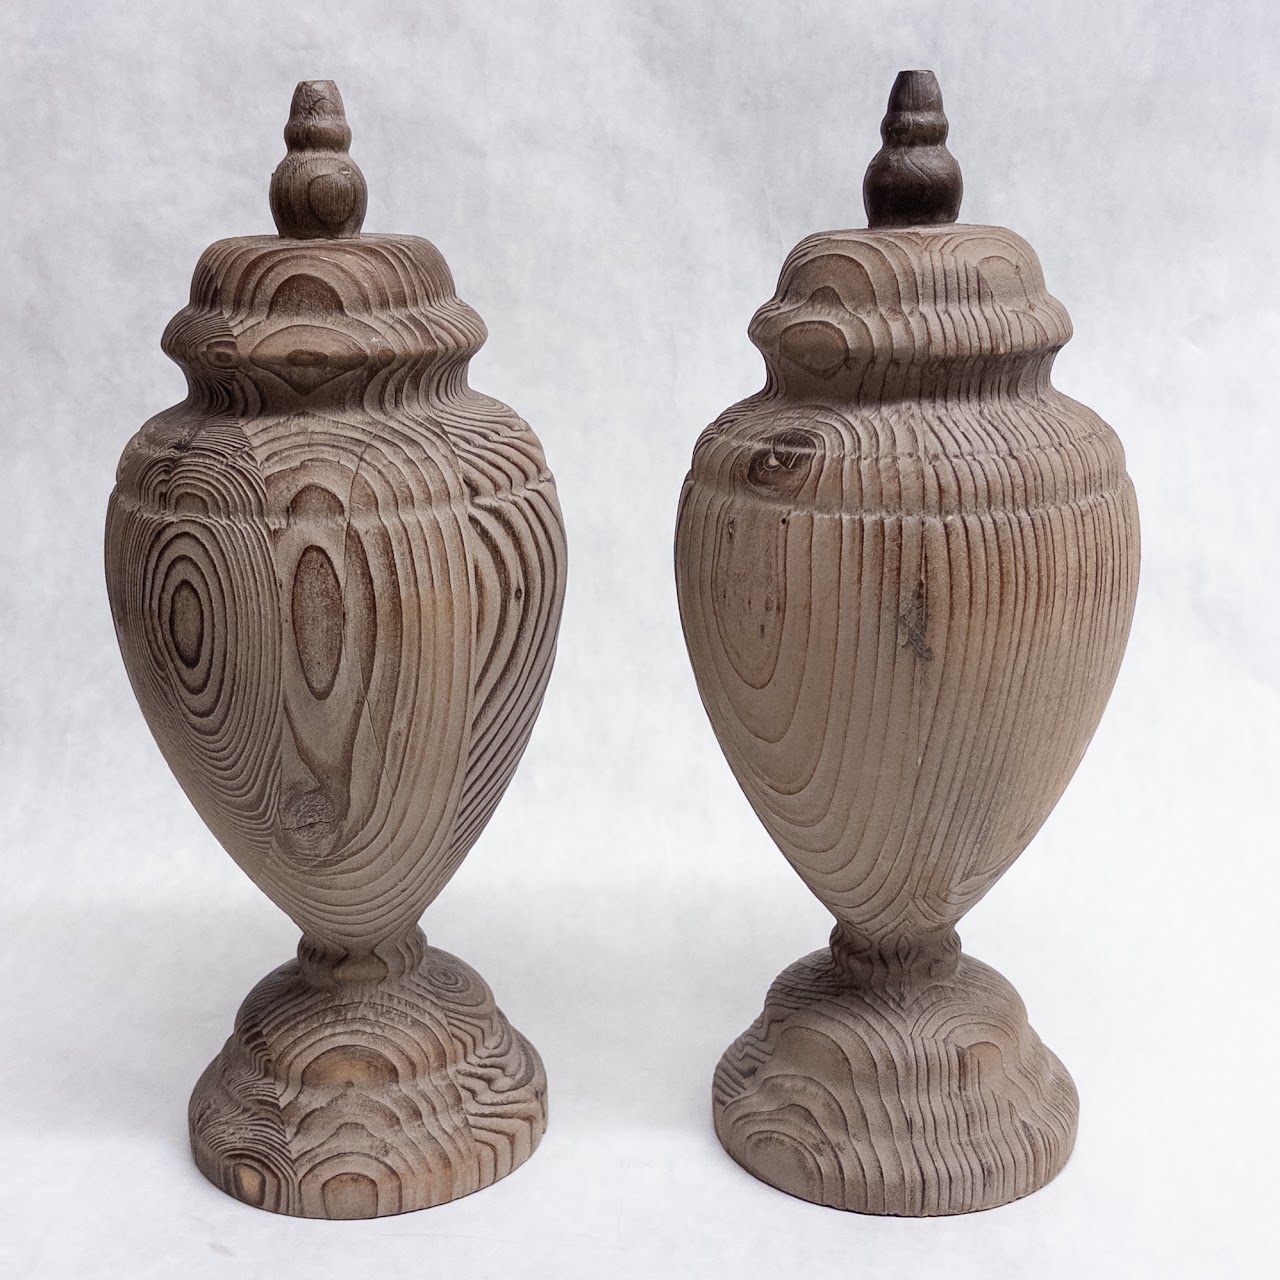 Weathered White Pine Wood Pair of Urn Shaped Sculptures